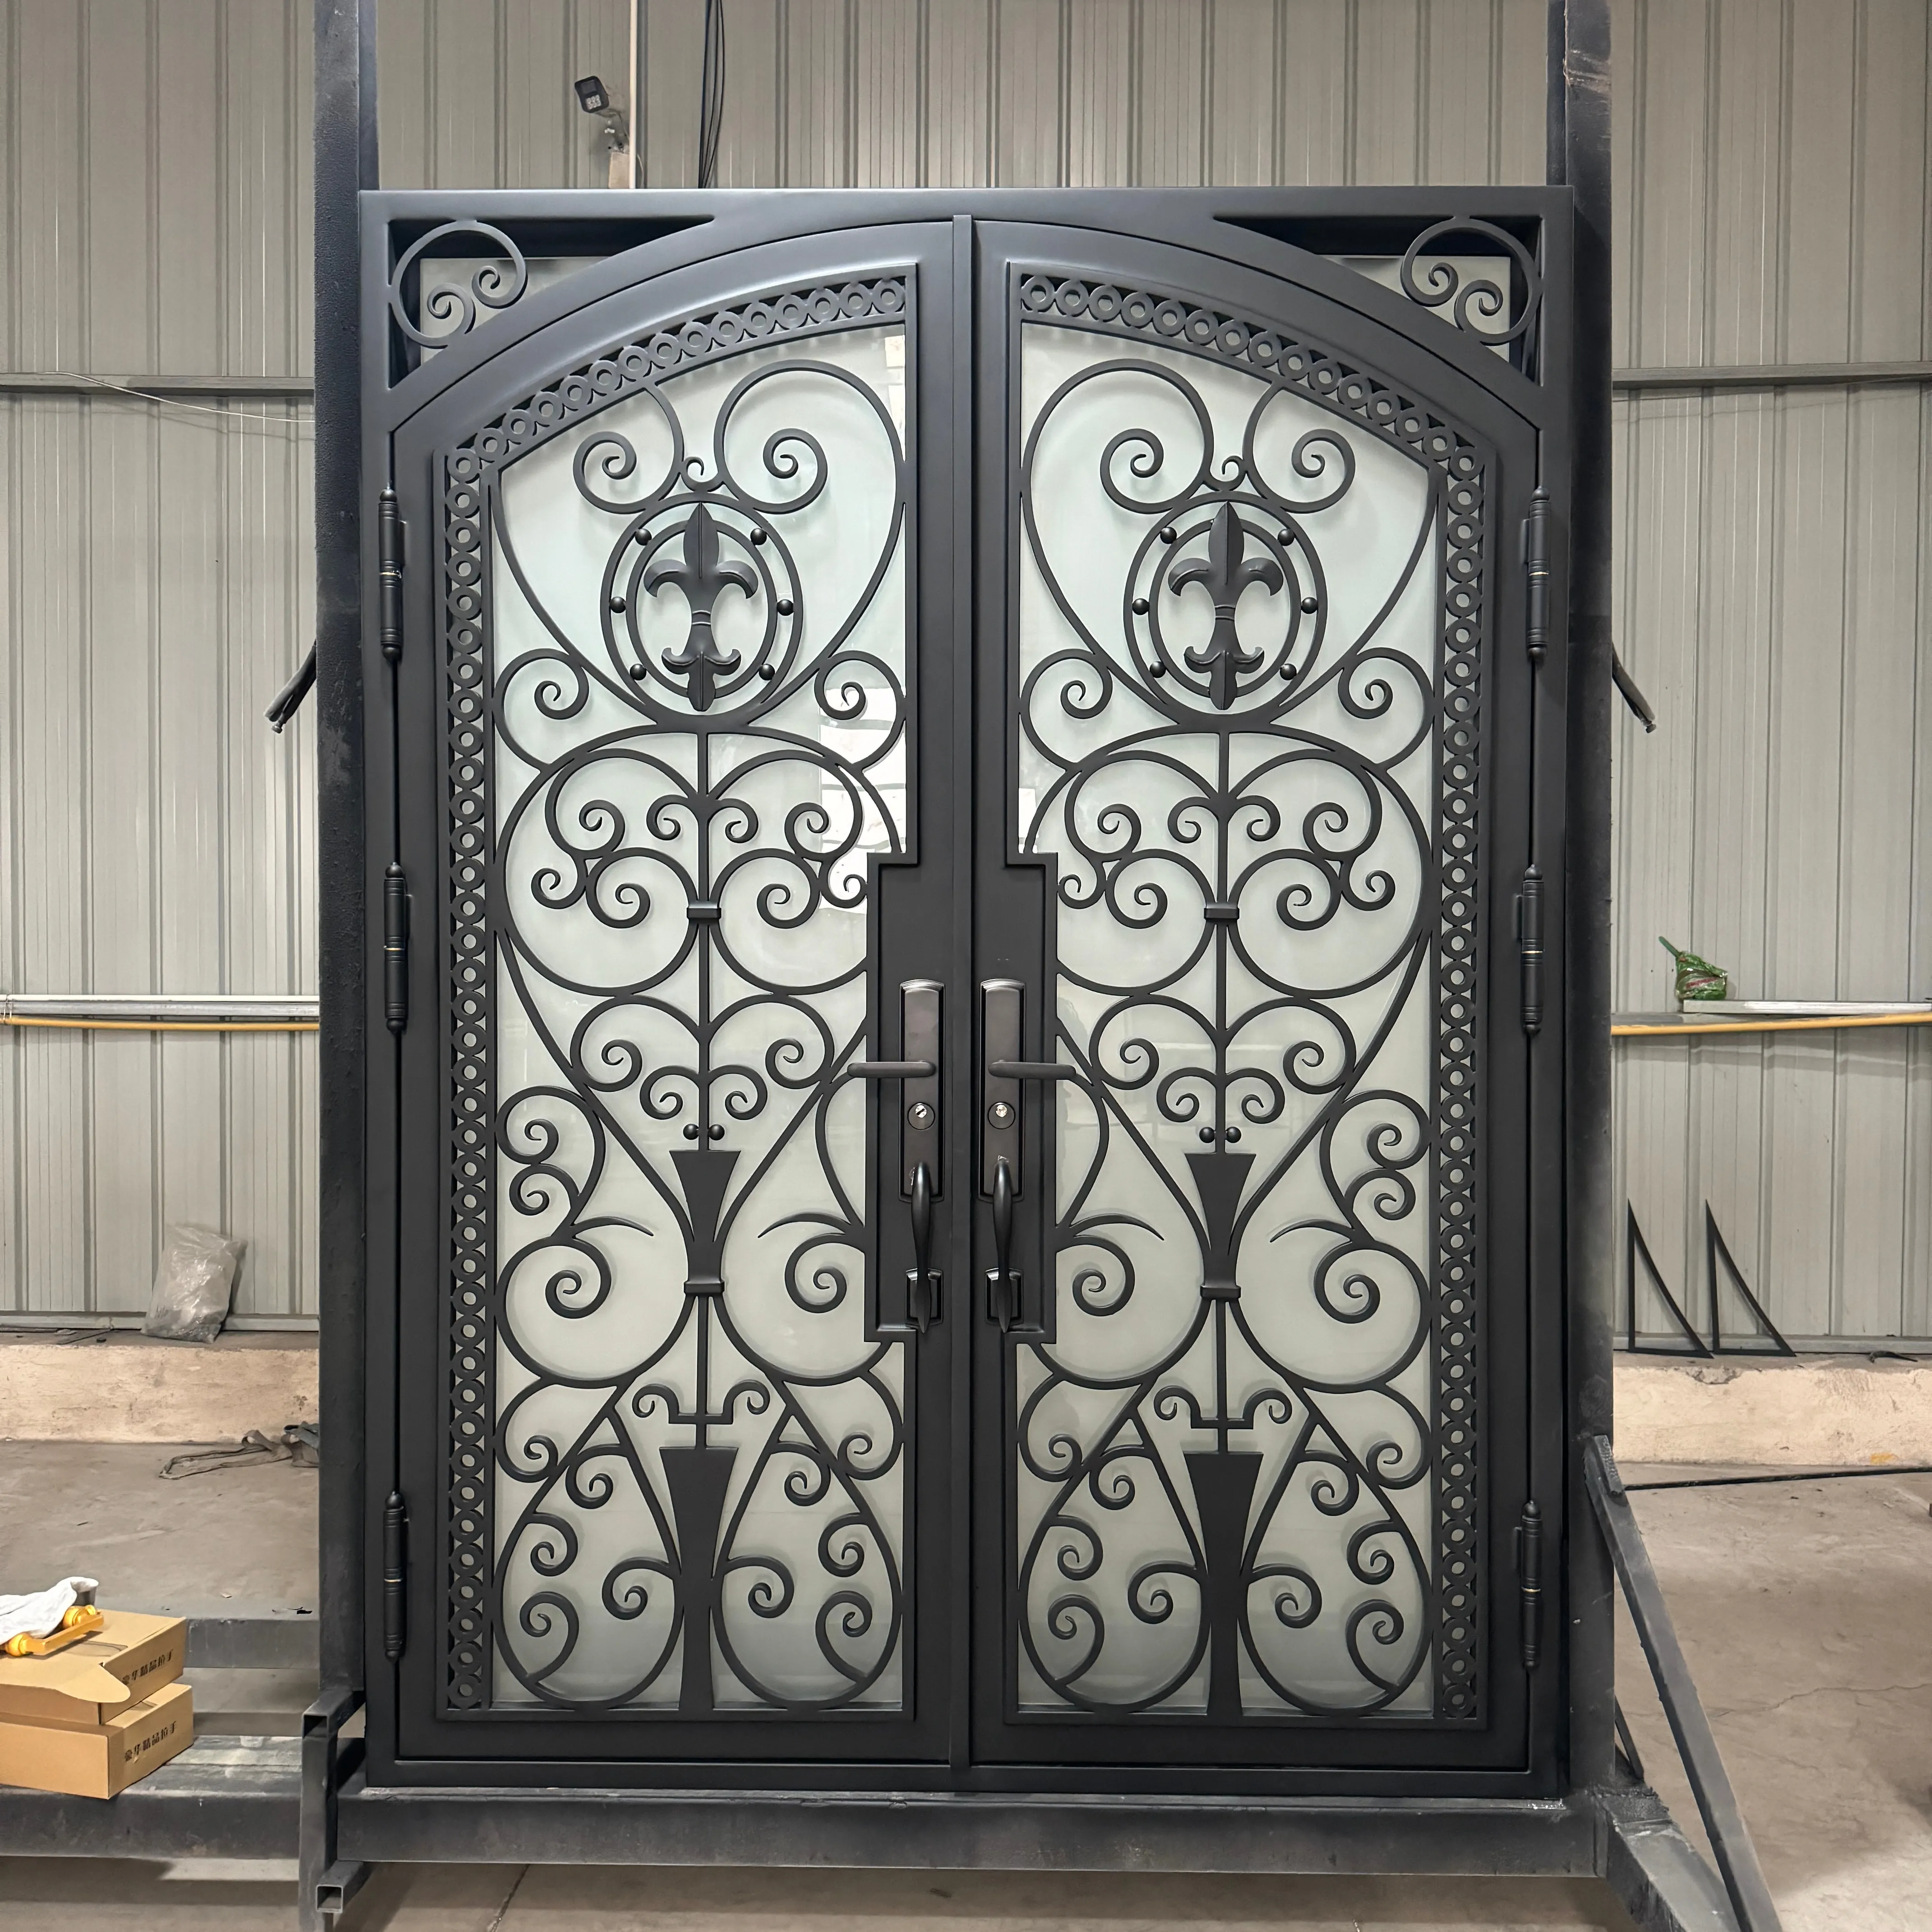 TOMA wrought iron entrance security steel door double door iron gates entrance double door iron gates entrance